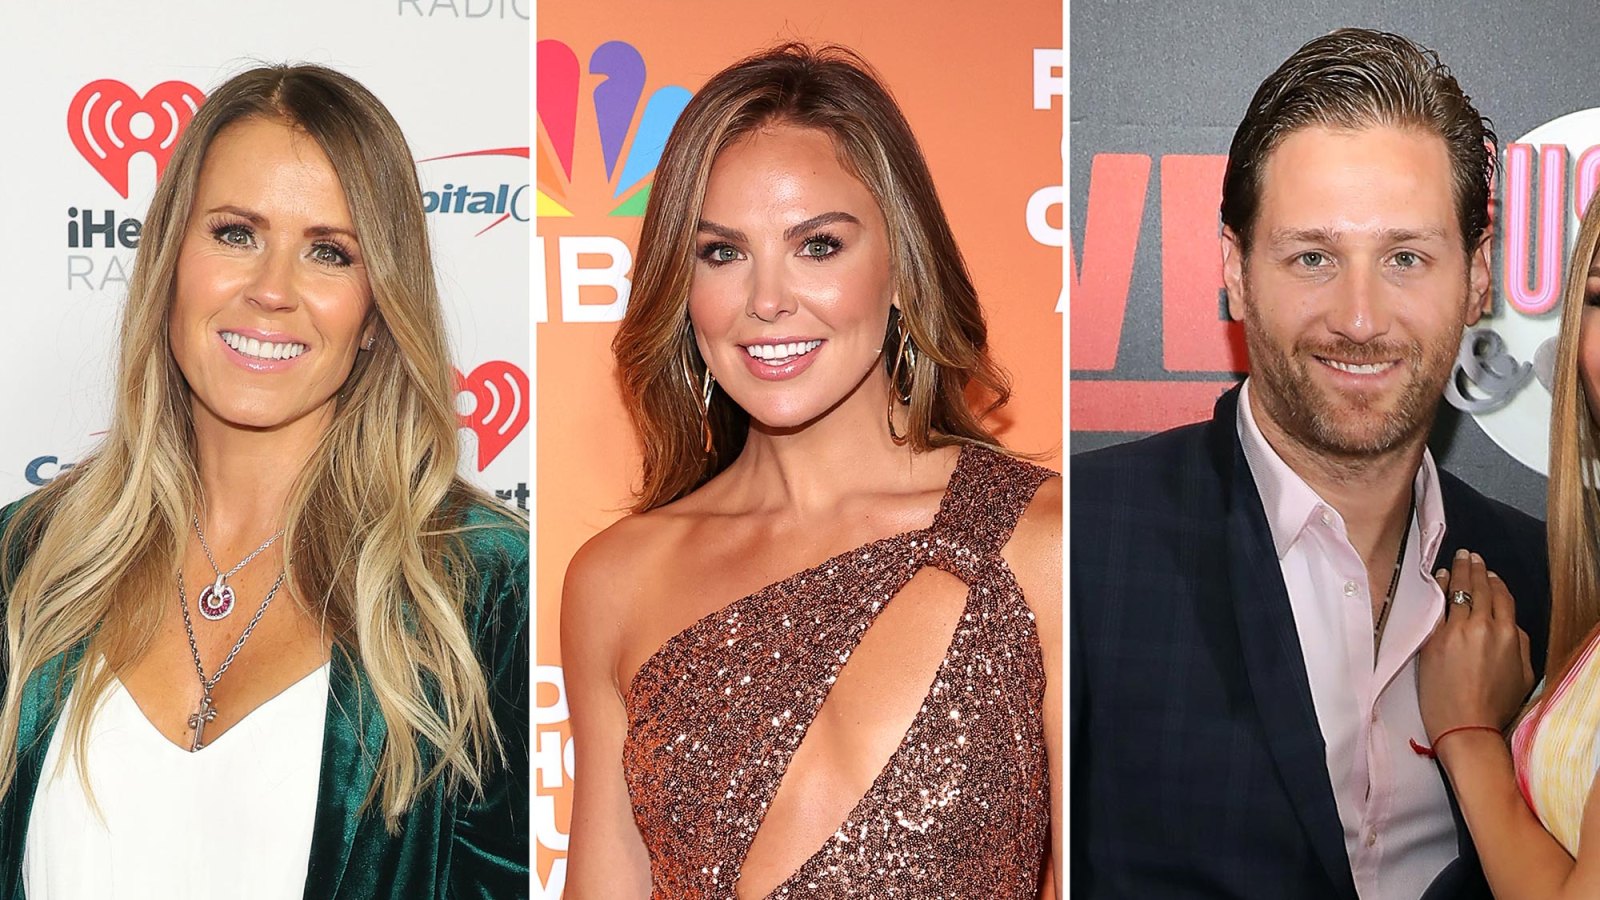 Prove Your Bachelor Nation Fandom Spans Across the Franchise With This Quiz